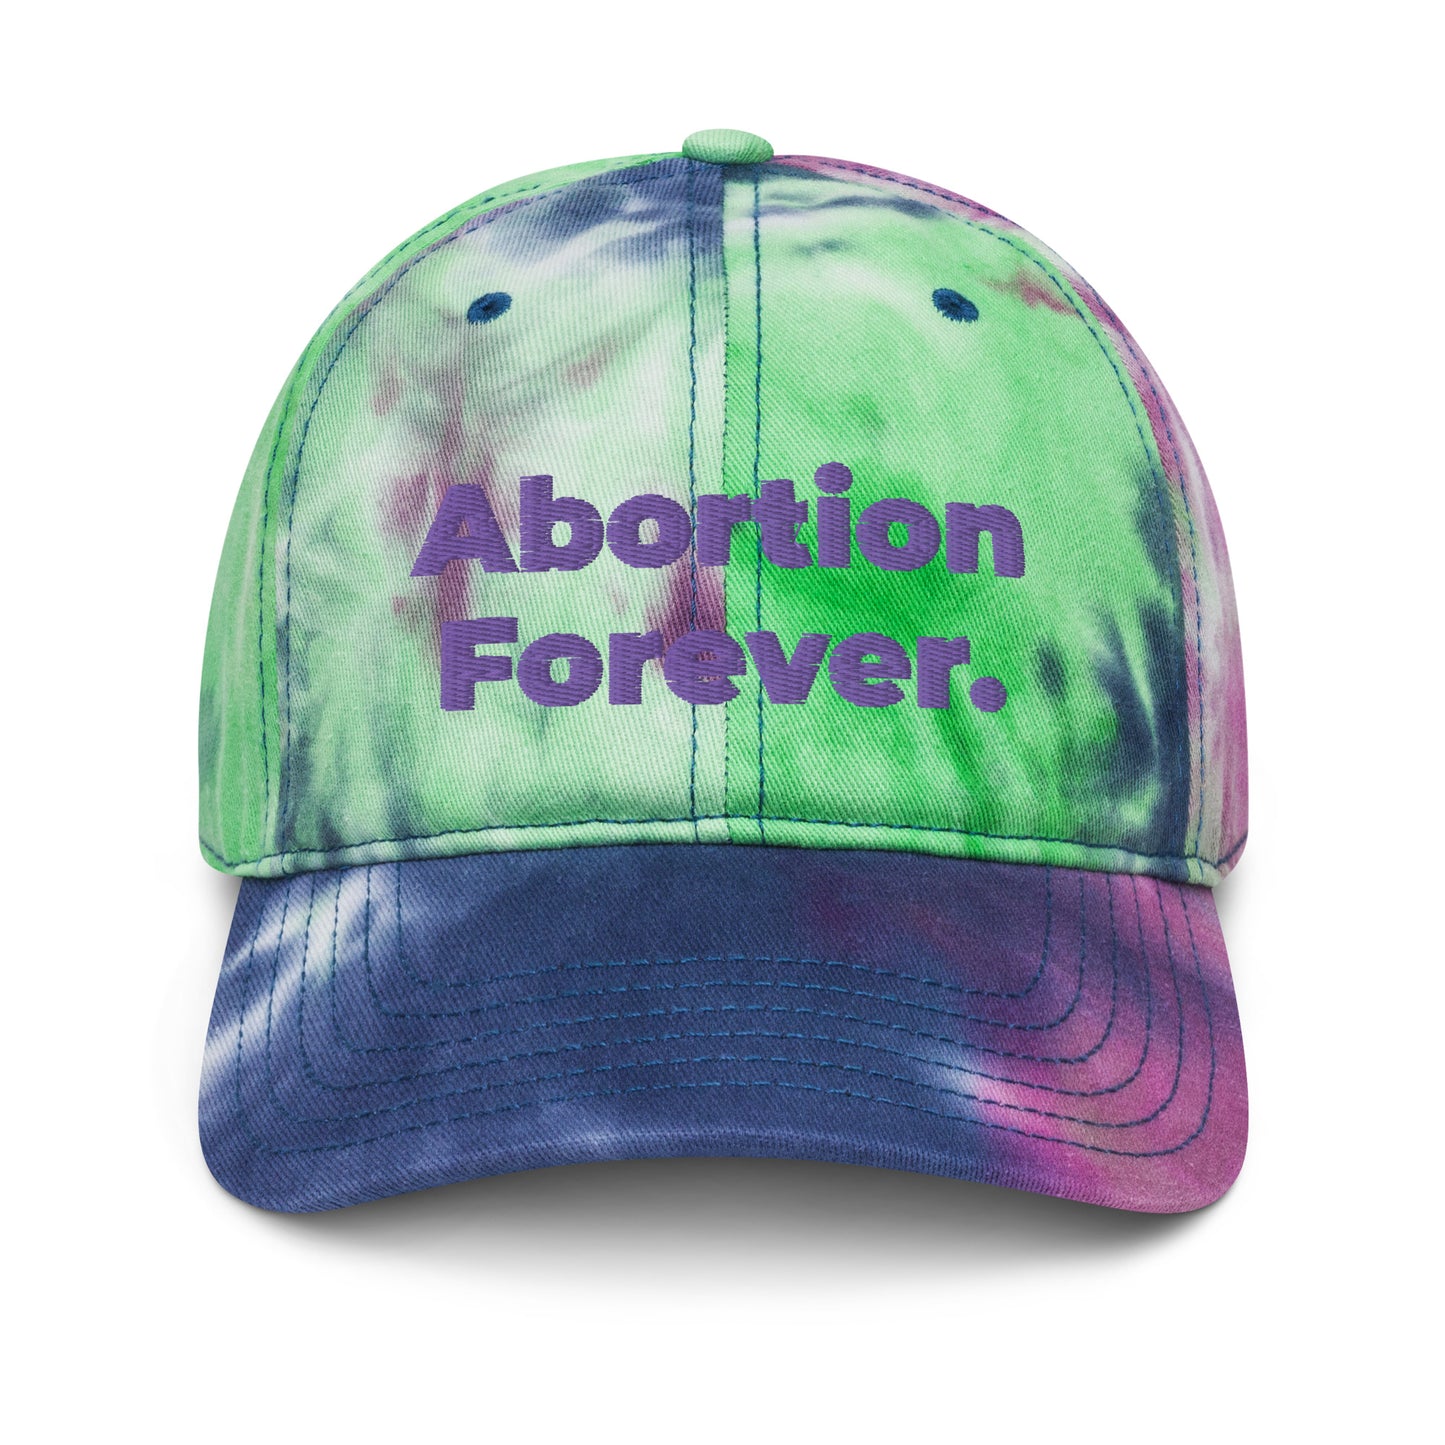 Abortion Forever Tie dye hat